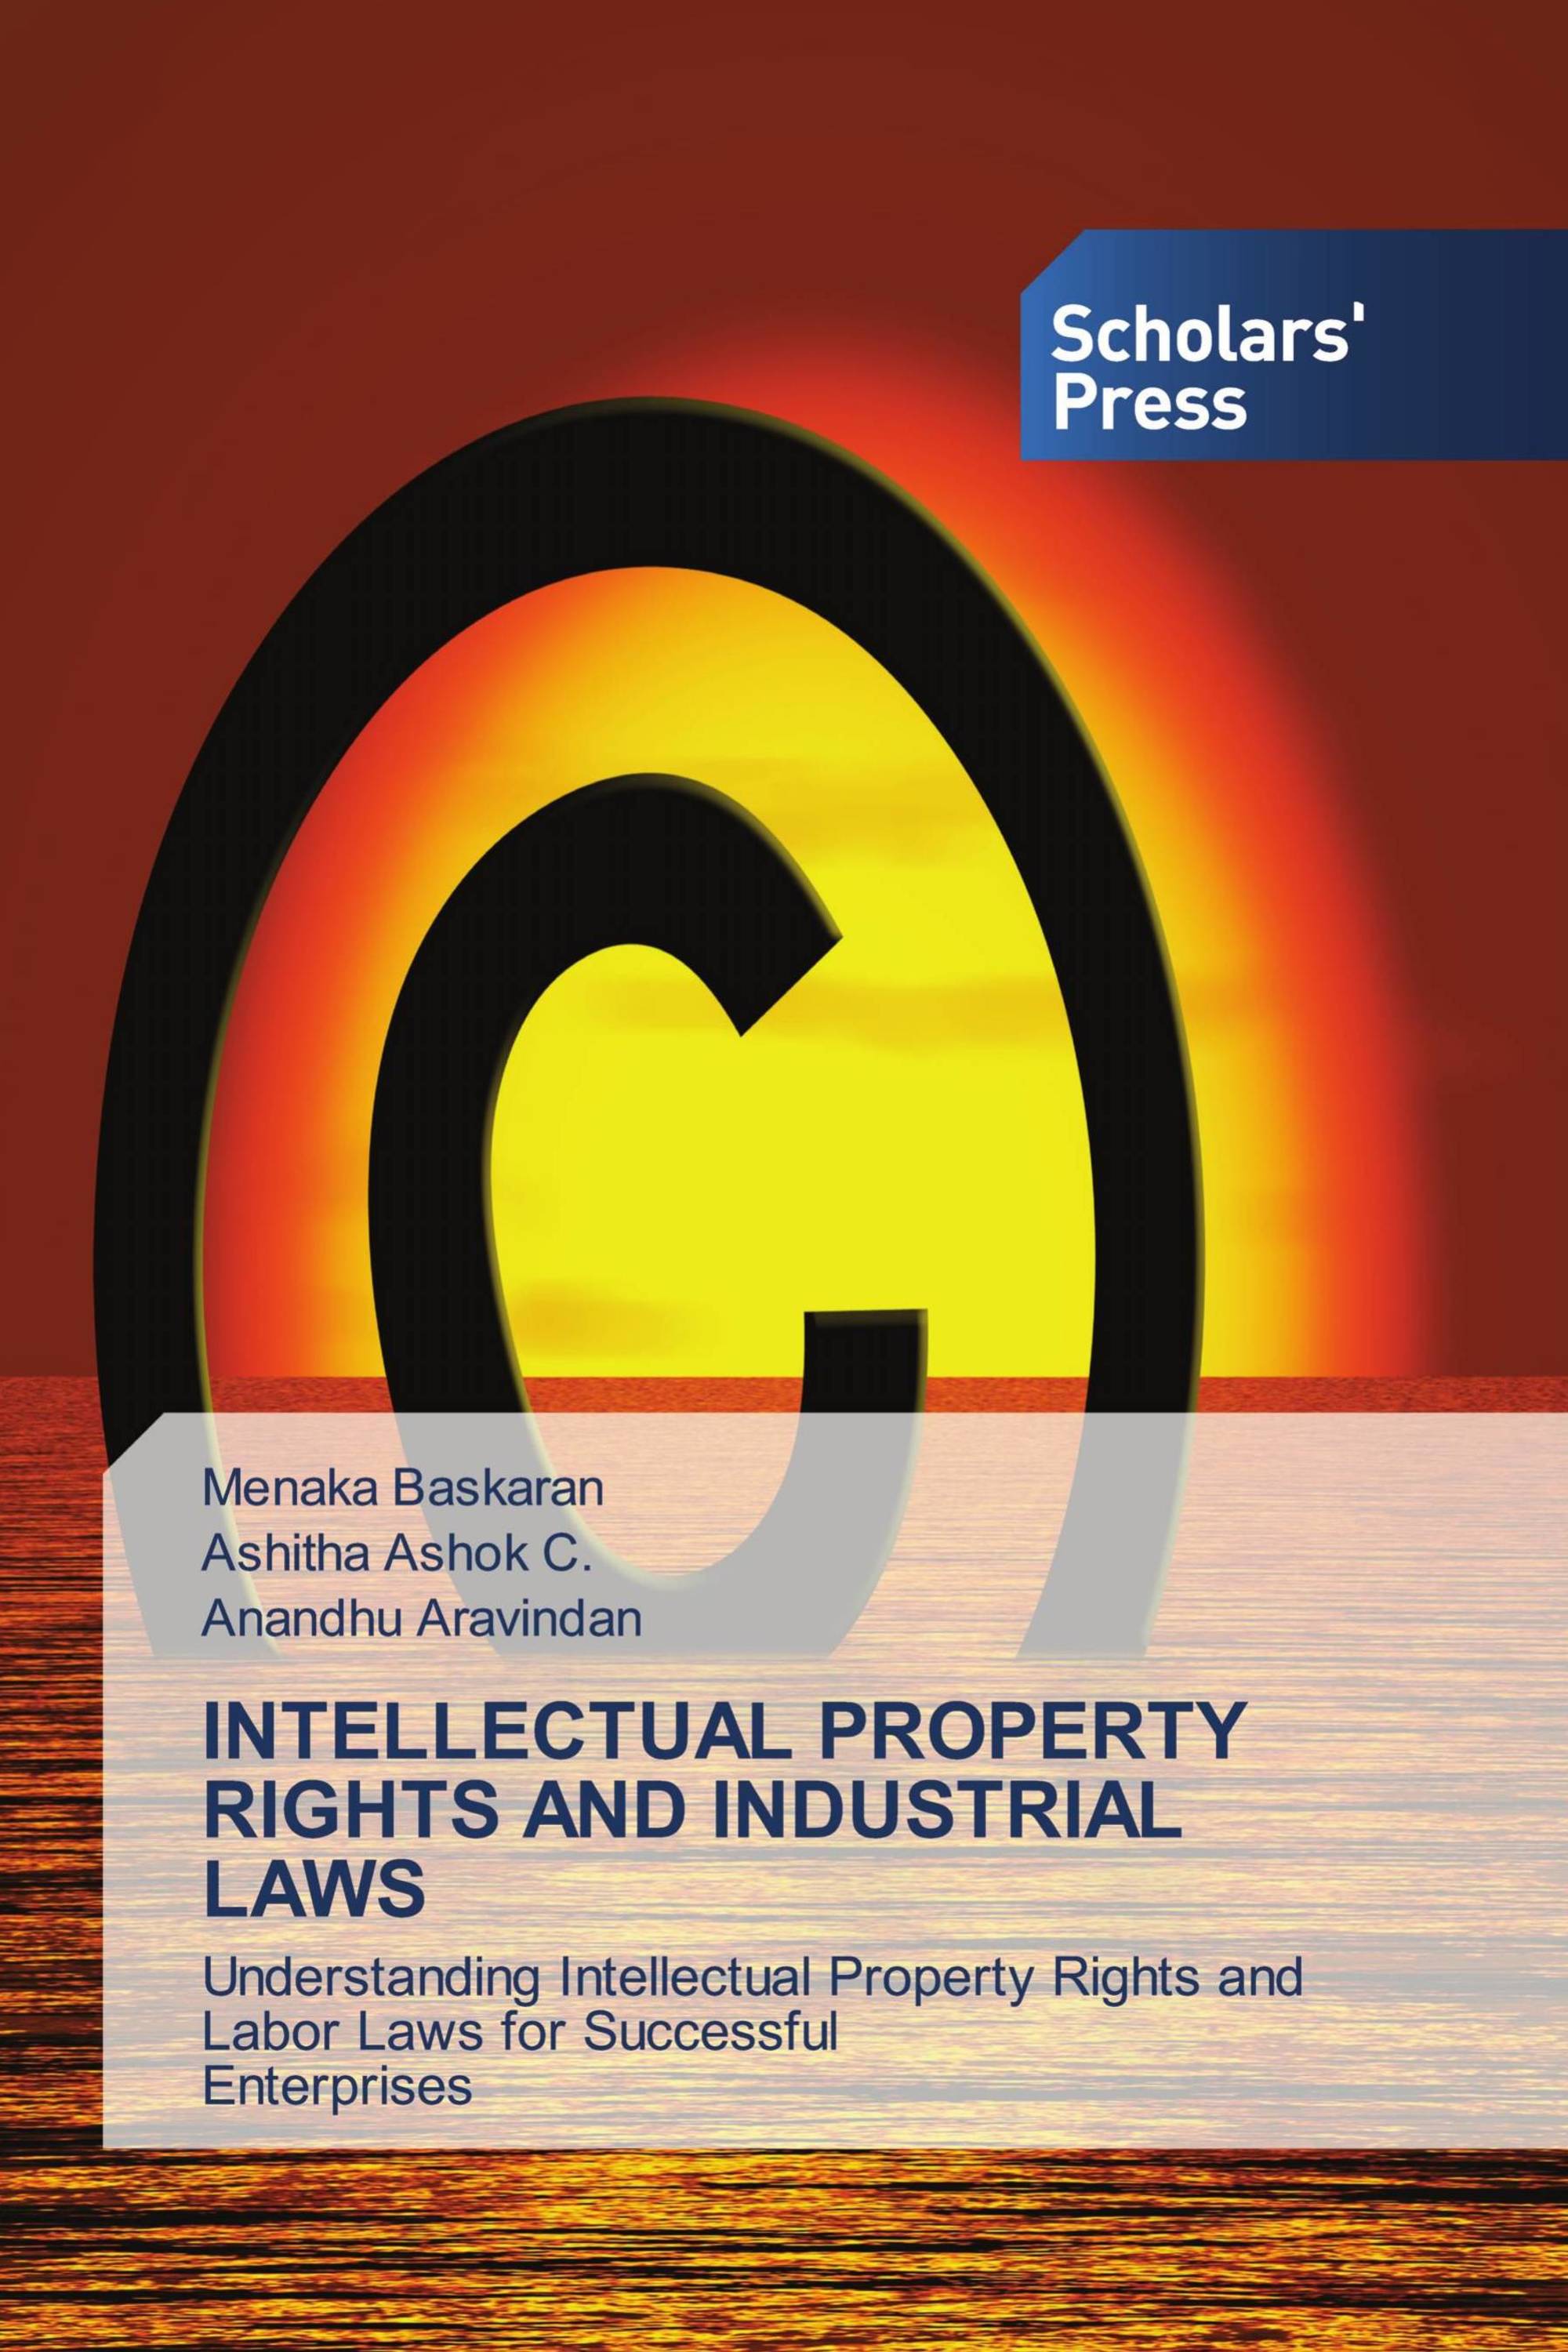 INTELLECTUAL PROPERTY RIGHTS AND INDUSTRIAL LAWS